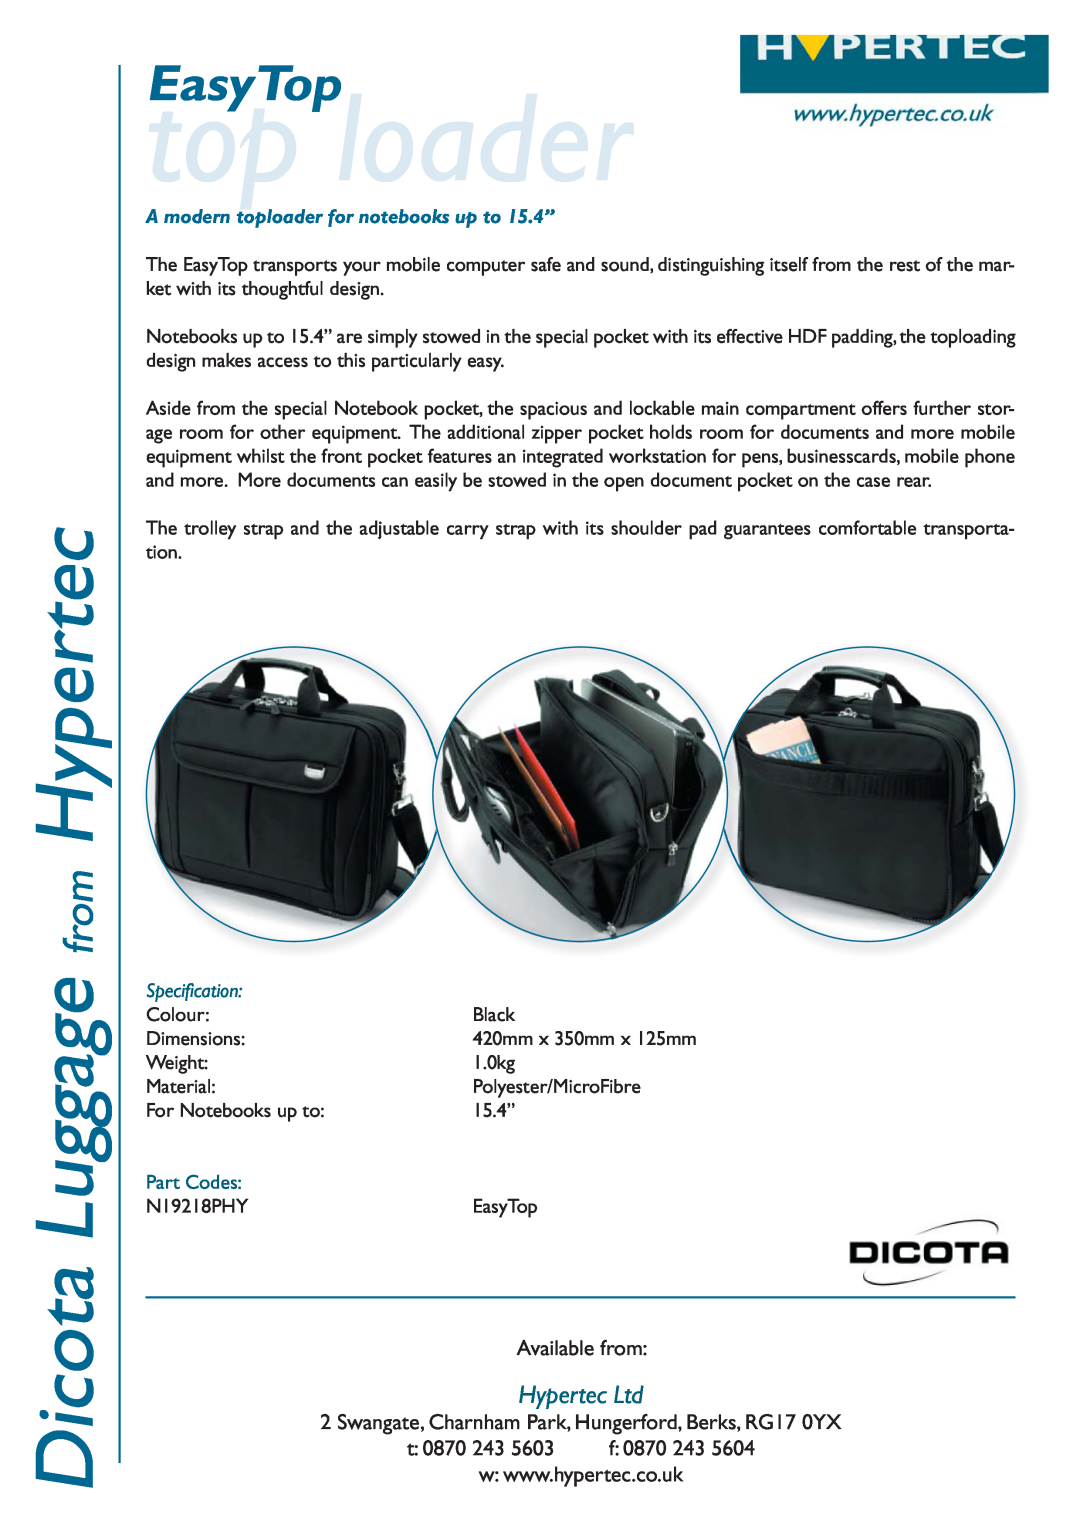 Hypertec N19218PHY dimensions top loader, Dicota Luggage from Hypertec, EasyTop, Available from, t 0870 243, Specification 